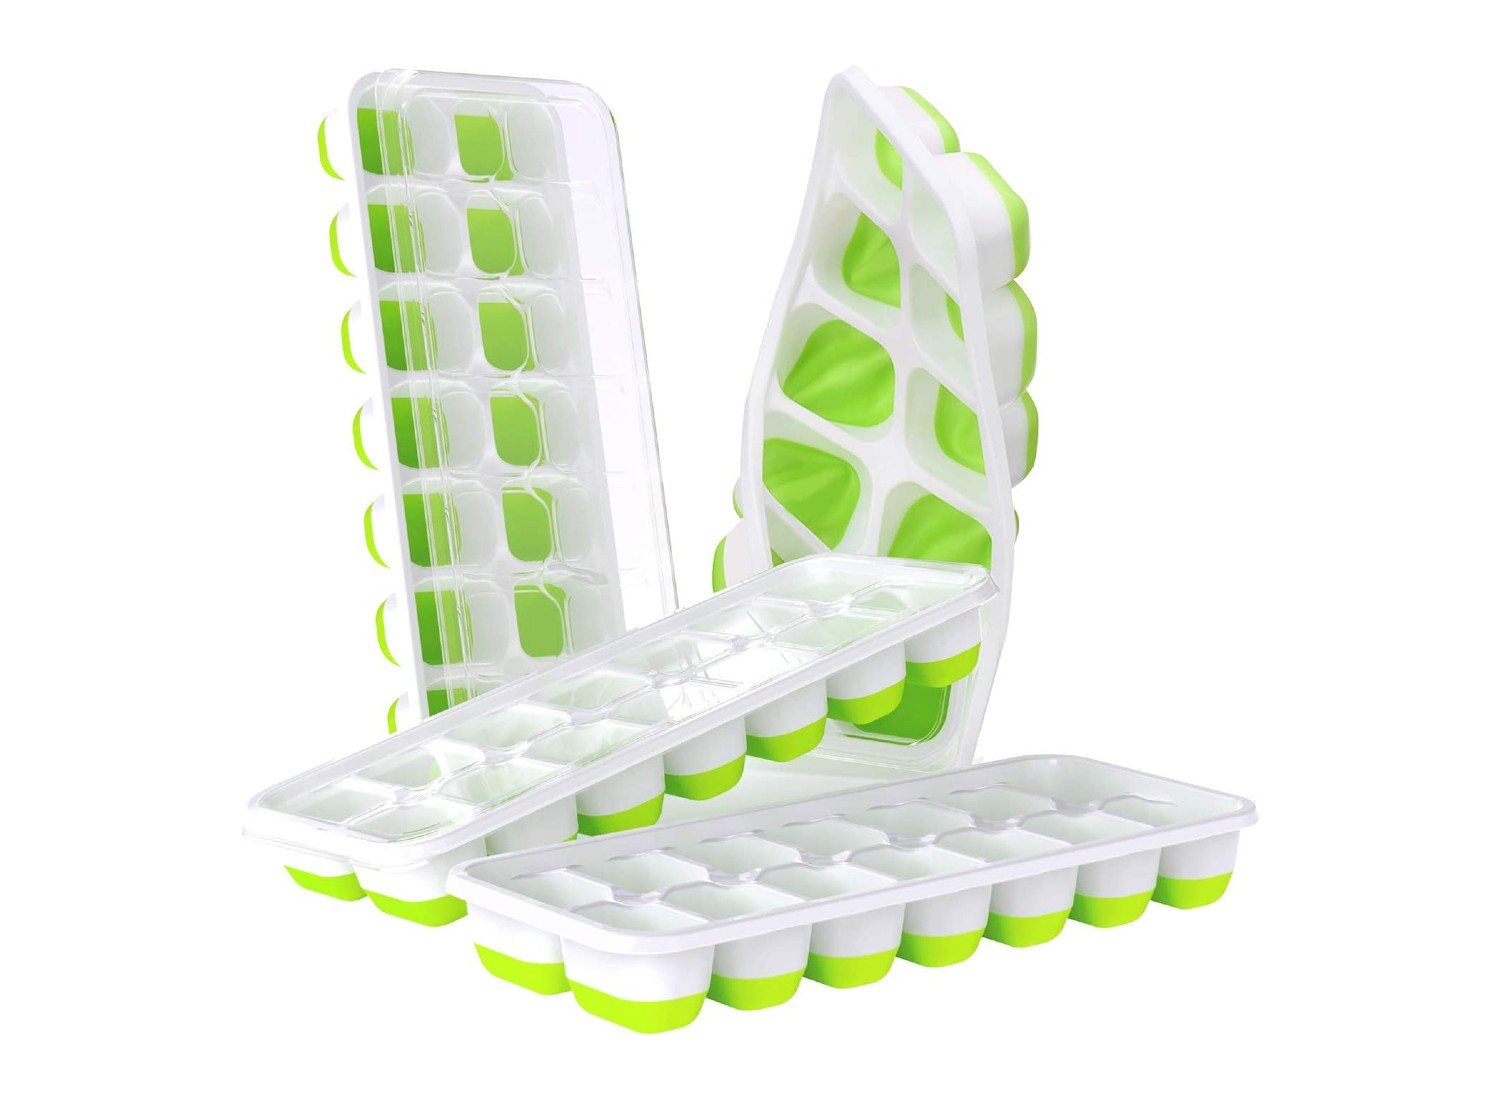 64 Silicone Ice Cube Trays With Lid And Bin -101oz- Easy Release